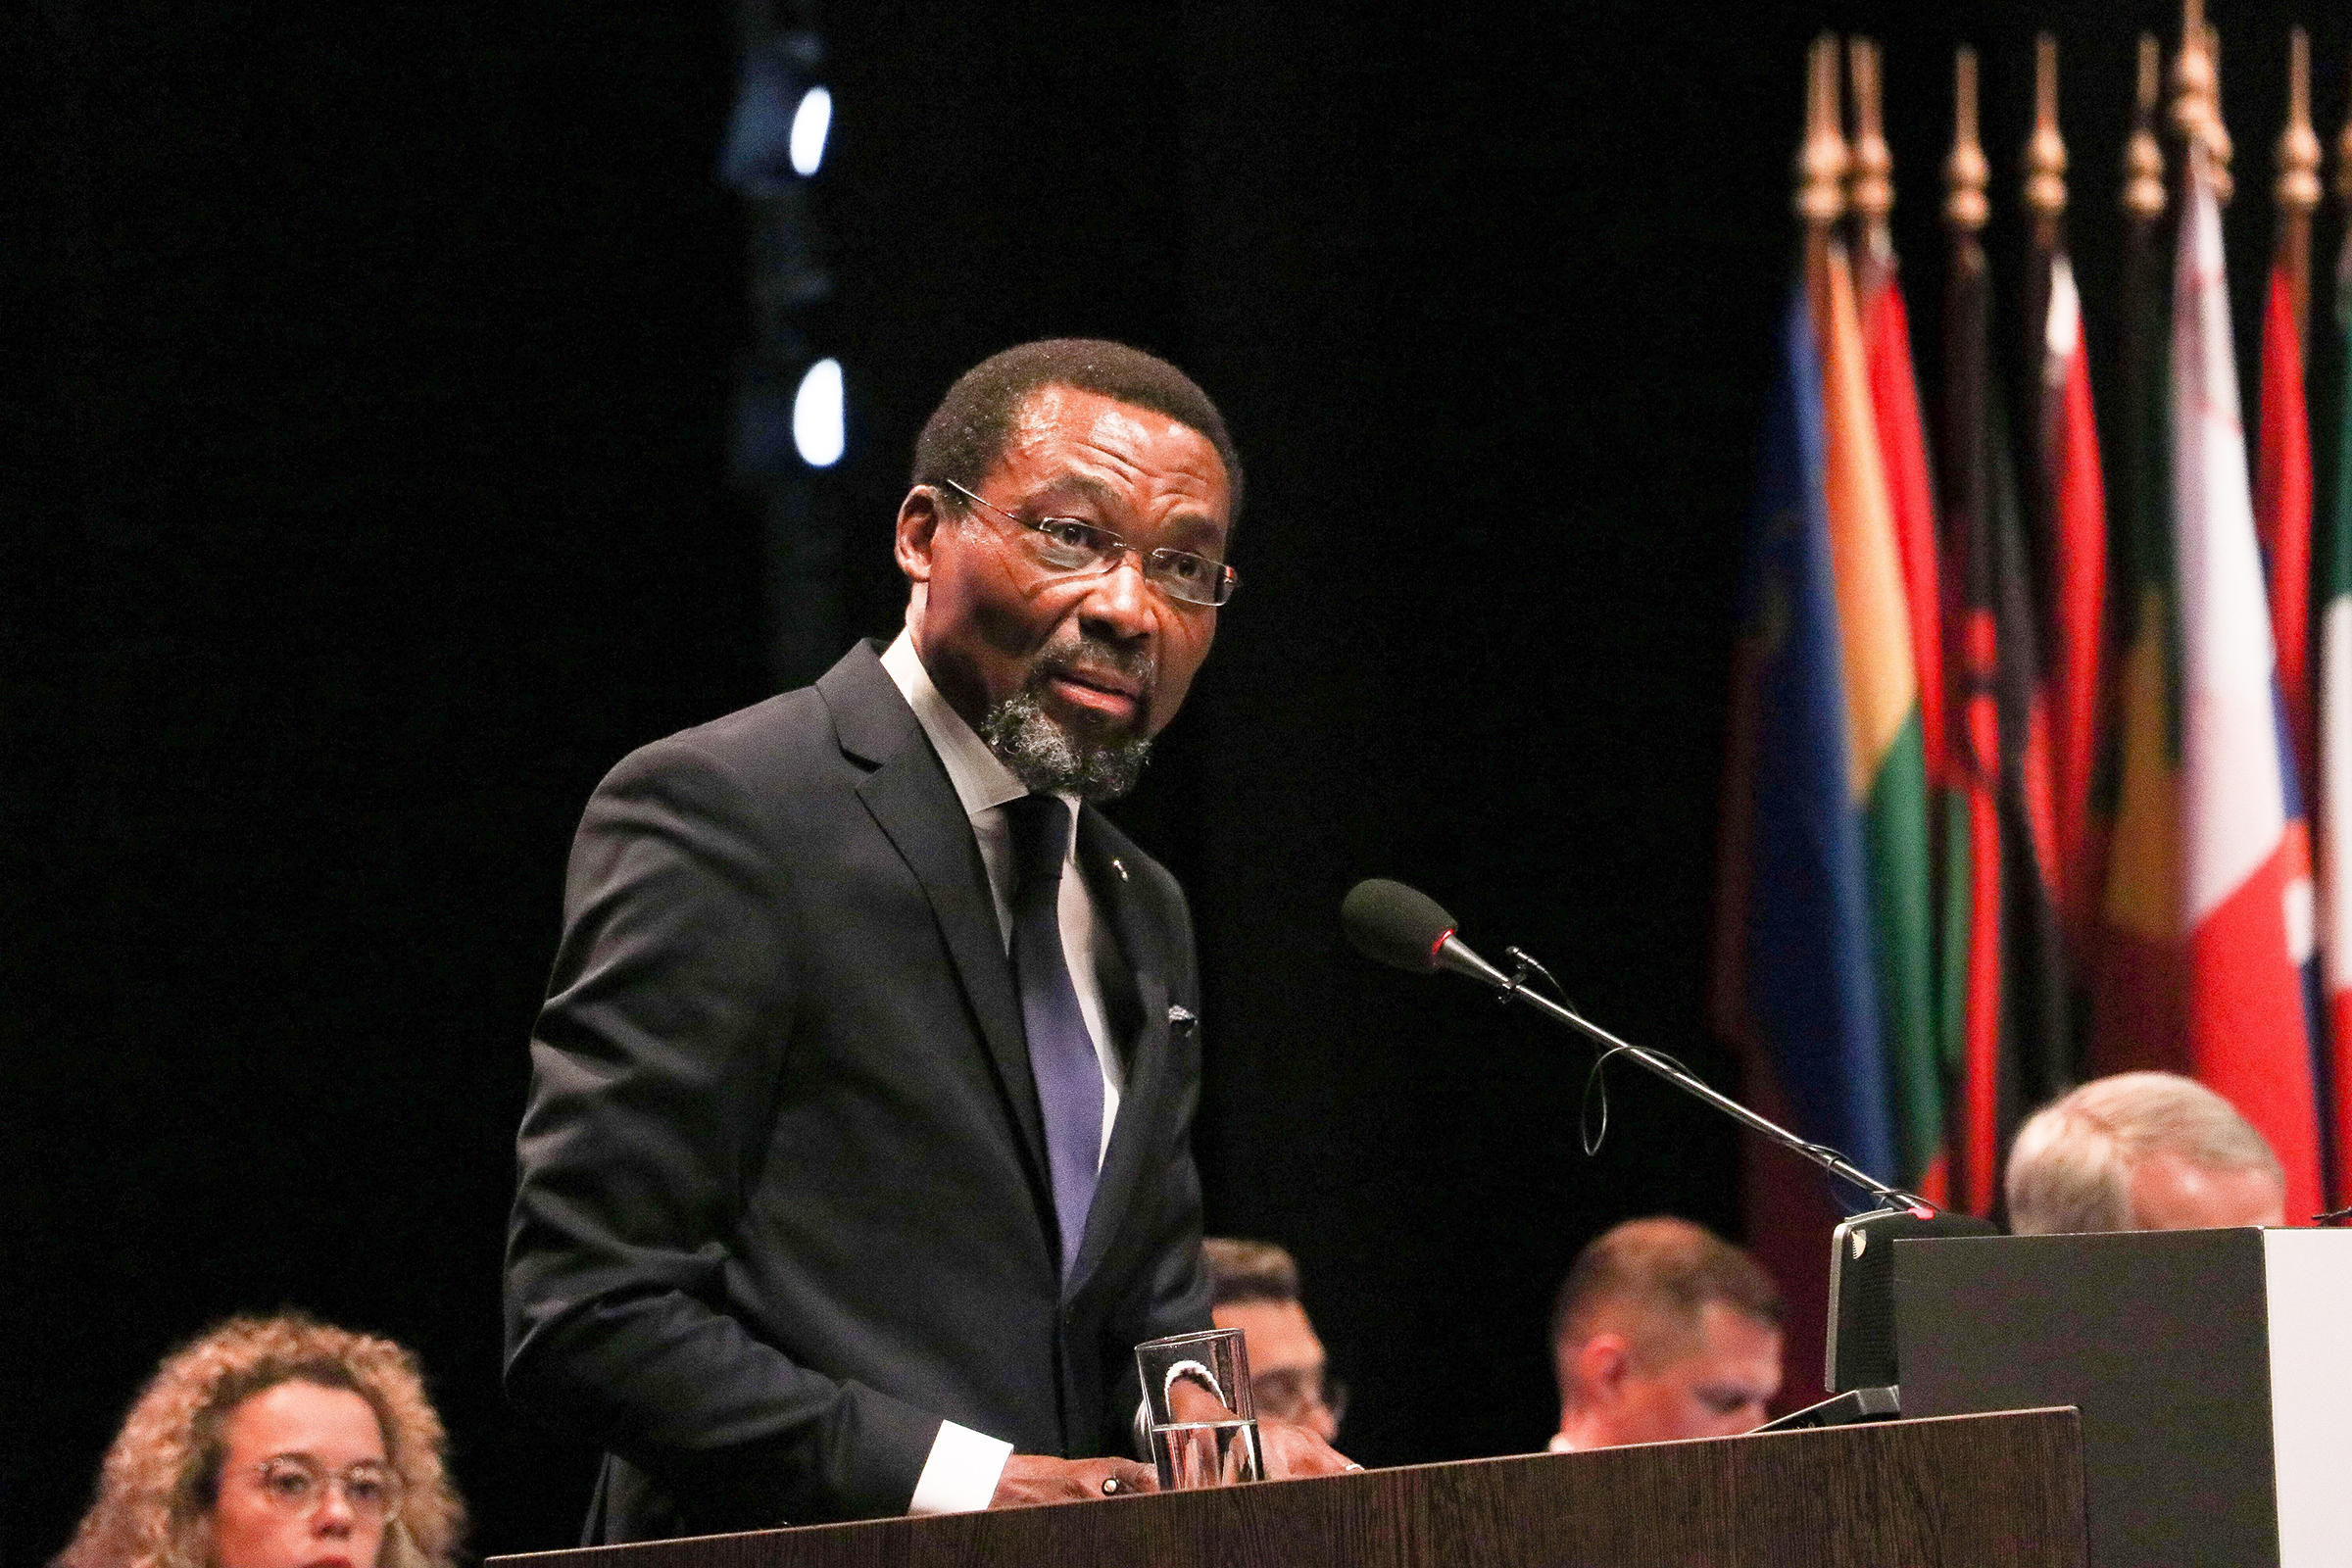 Judge Chile Eboe-Osuji, President of the International Criminal Court makes a speech during the 18th session of the ICCs Assembly of States Parties, in The Hague, Netherlands on Dec. 2, 2019. (Abdullah Asiran—Anadolu Agency via Getty Images)